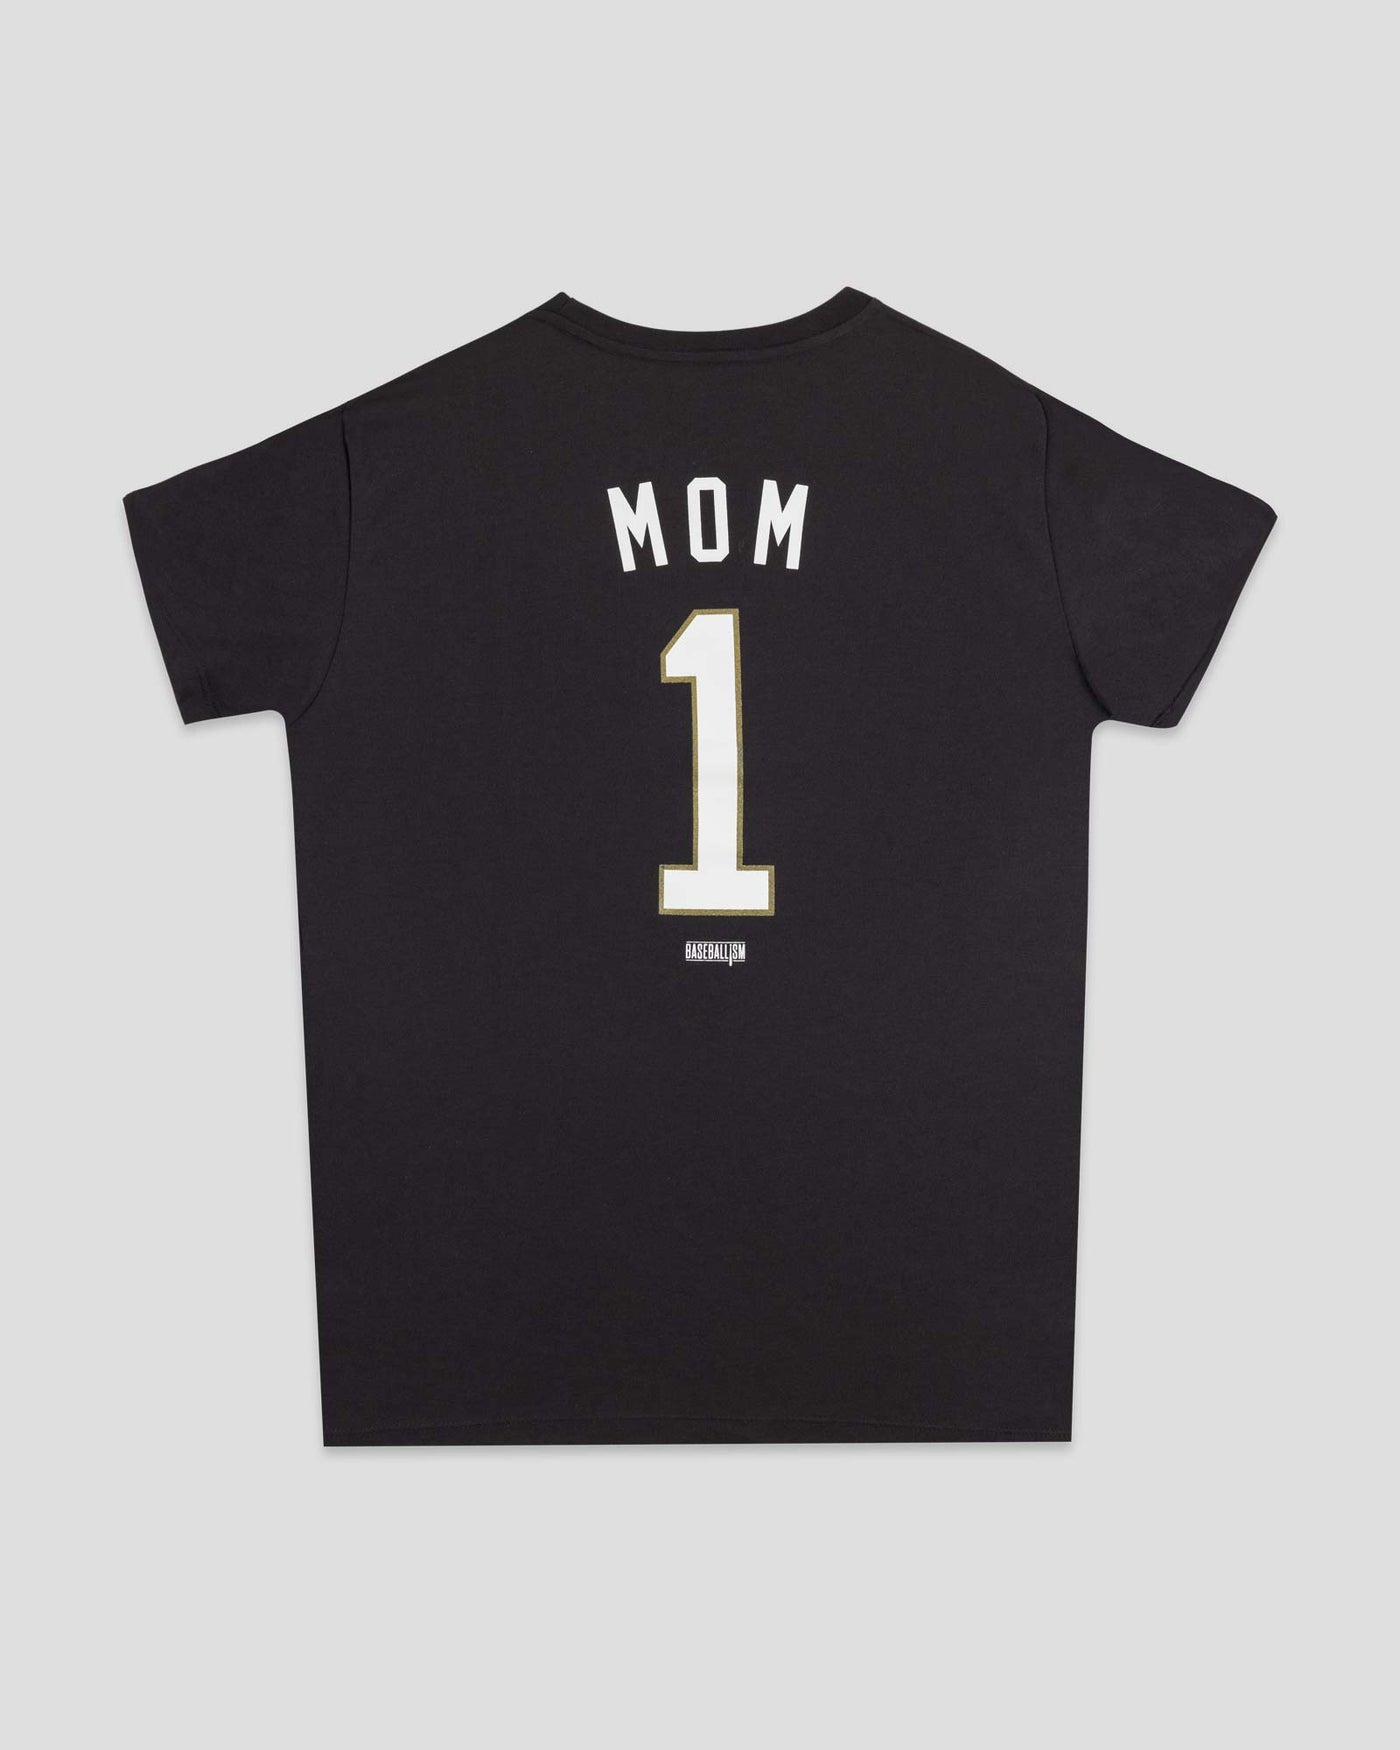 Mom's Number One - Women's Warm-Up Tee